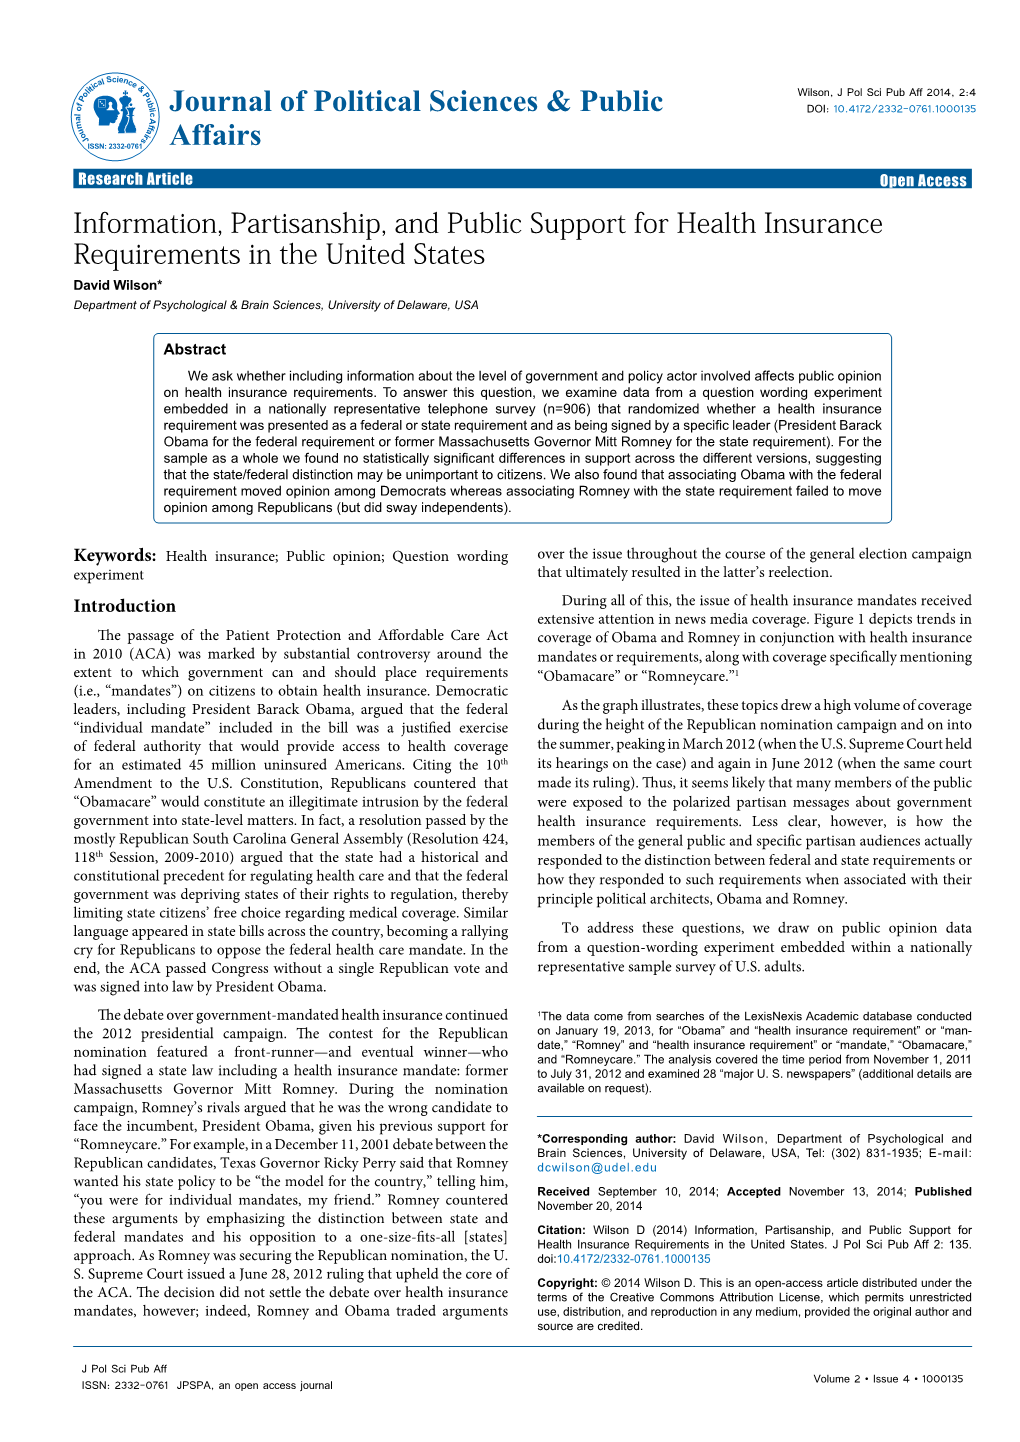 Information, Partisanship, and Public Support for Health Insurance